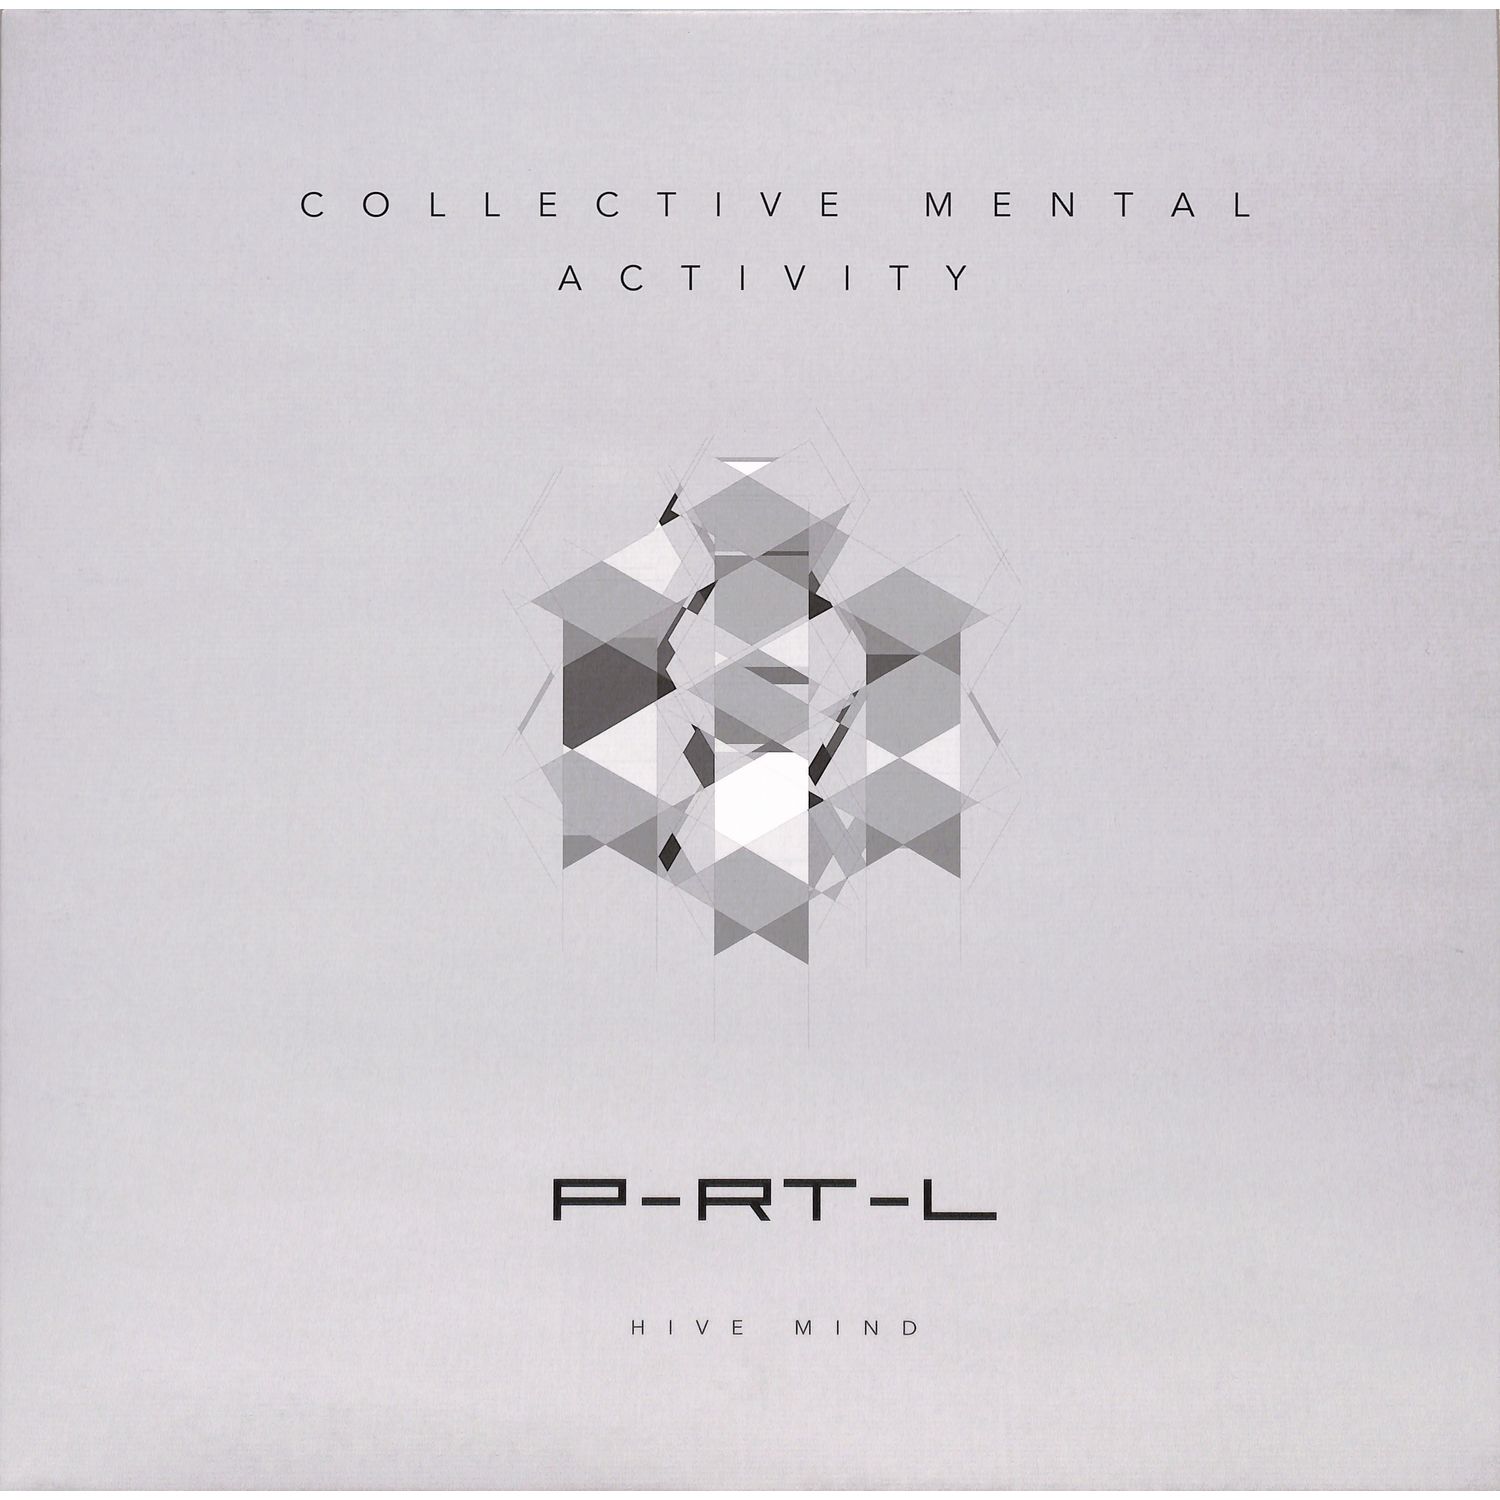 Hive Mind - COLLECTIVE MENTAL ACTIVITY